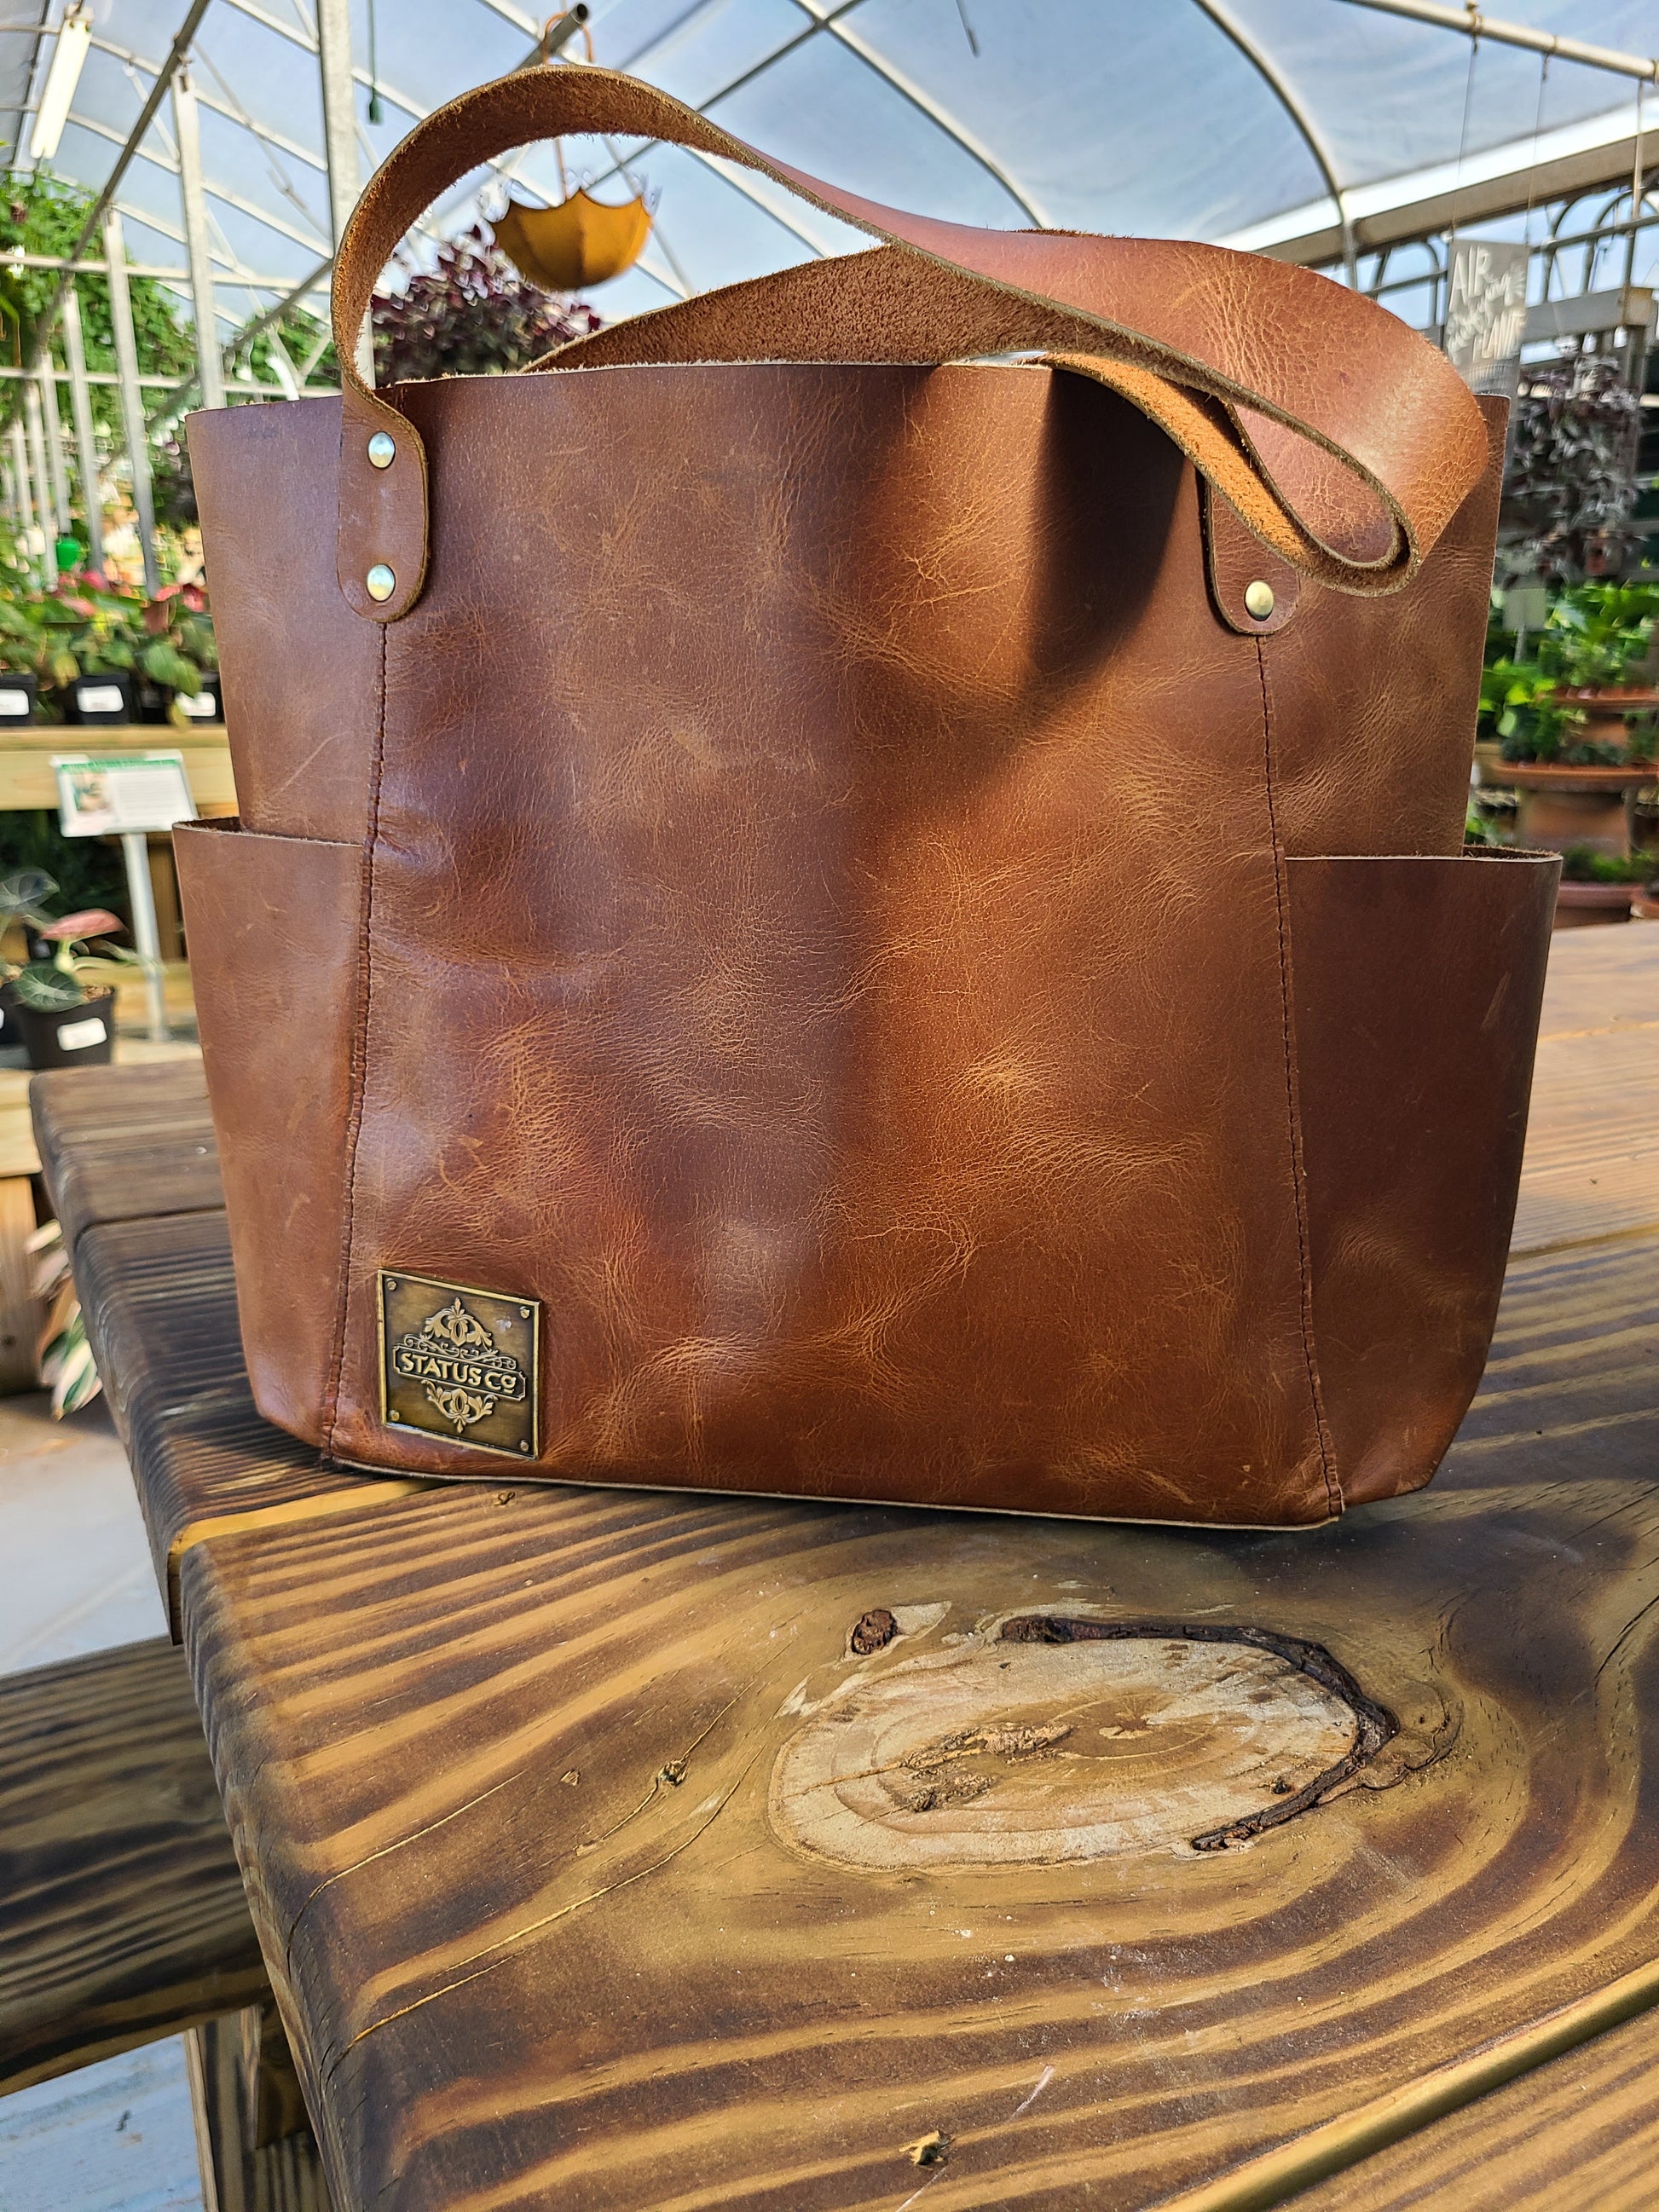 Cowhide Leather Designer Tote & Carry-On Bag-Status Co. Leather Studio